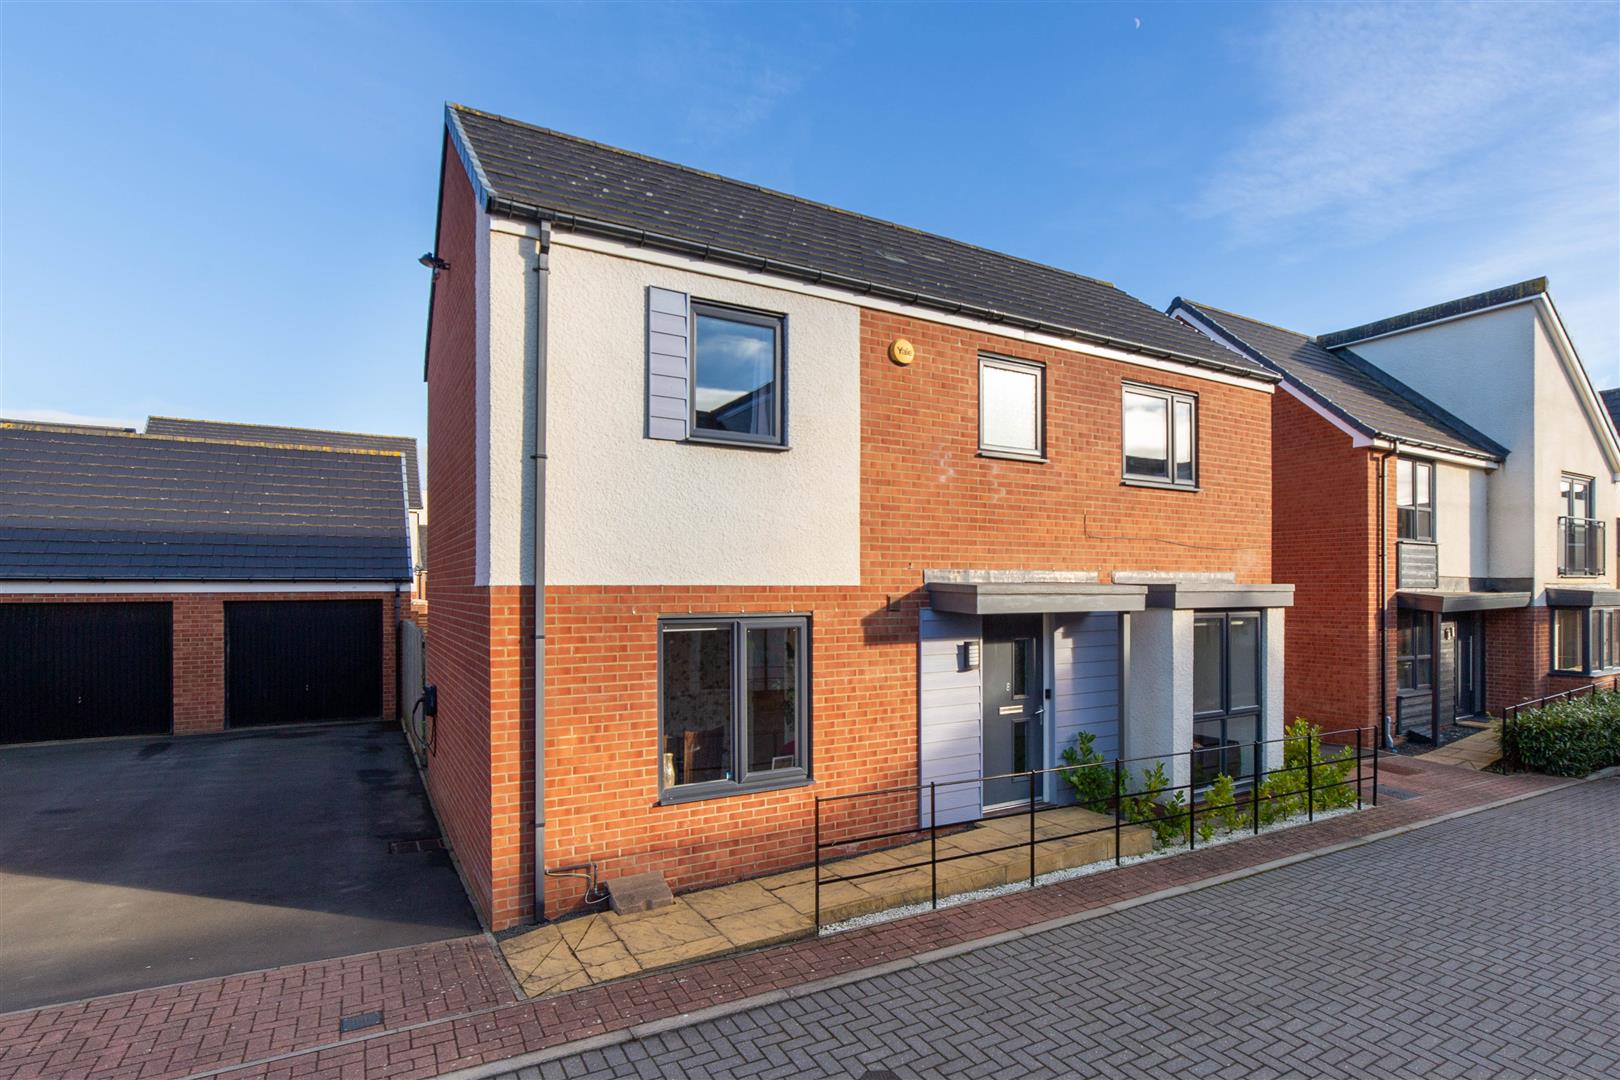 3 bed detached house for sale in Esperley Avenue, Newcastle Upon Tyne, NE13